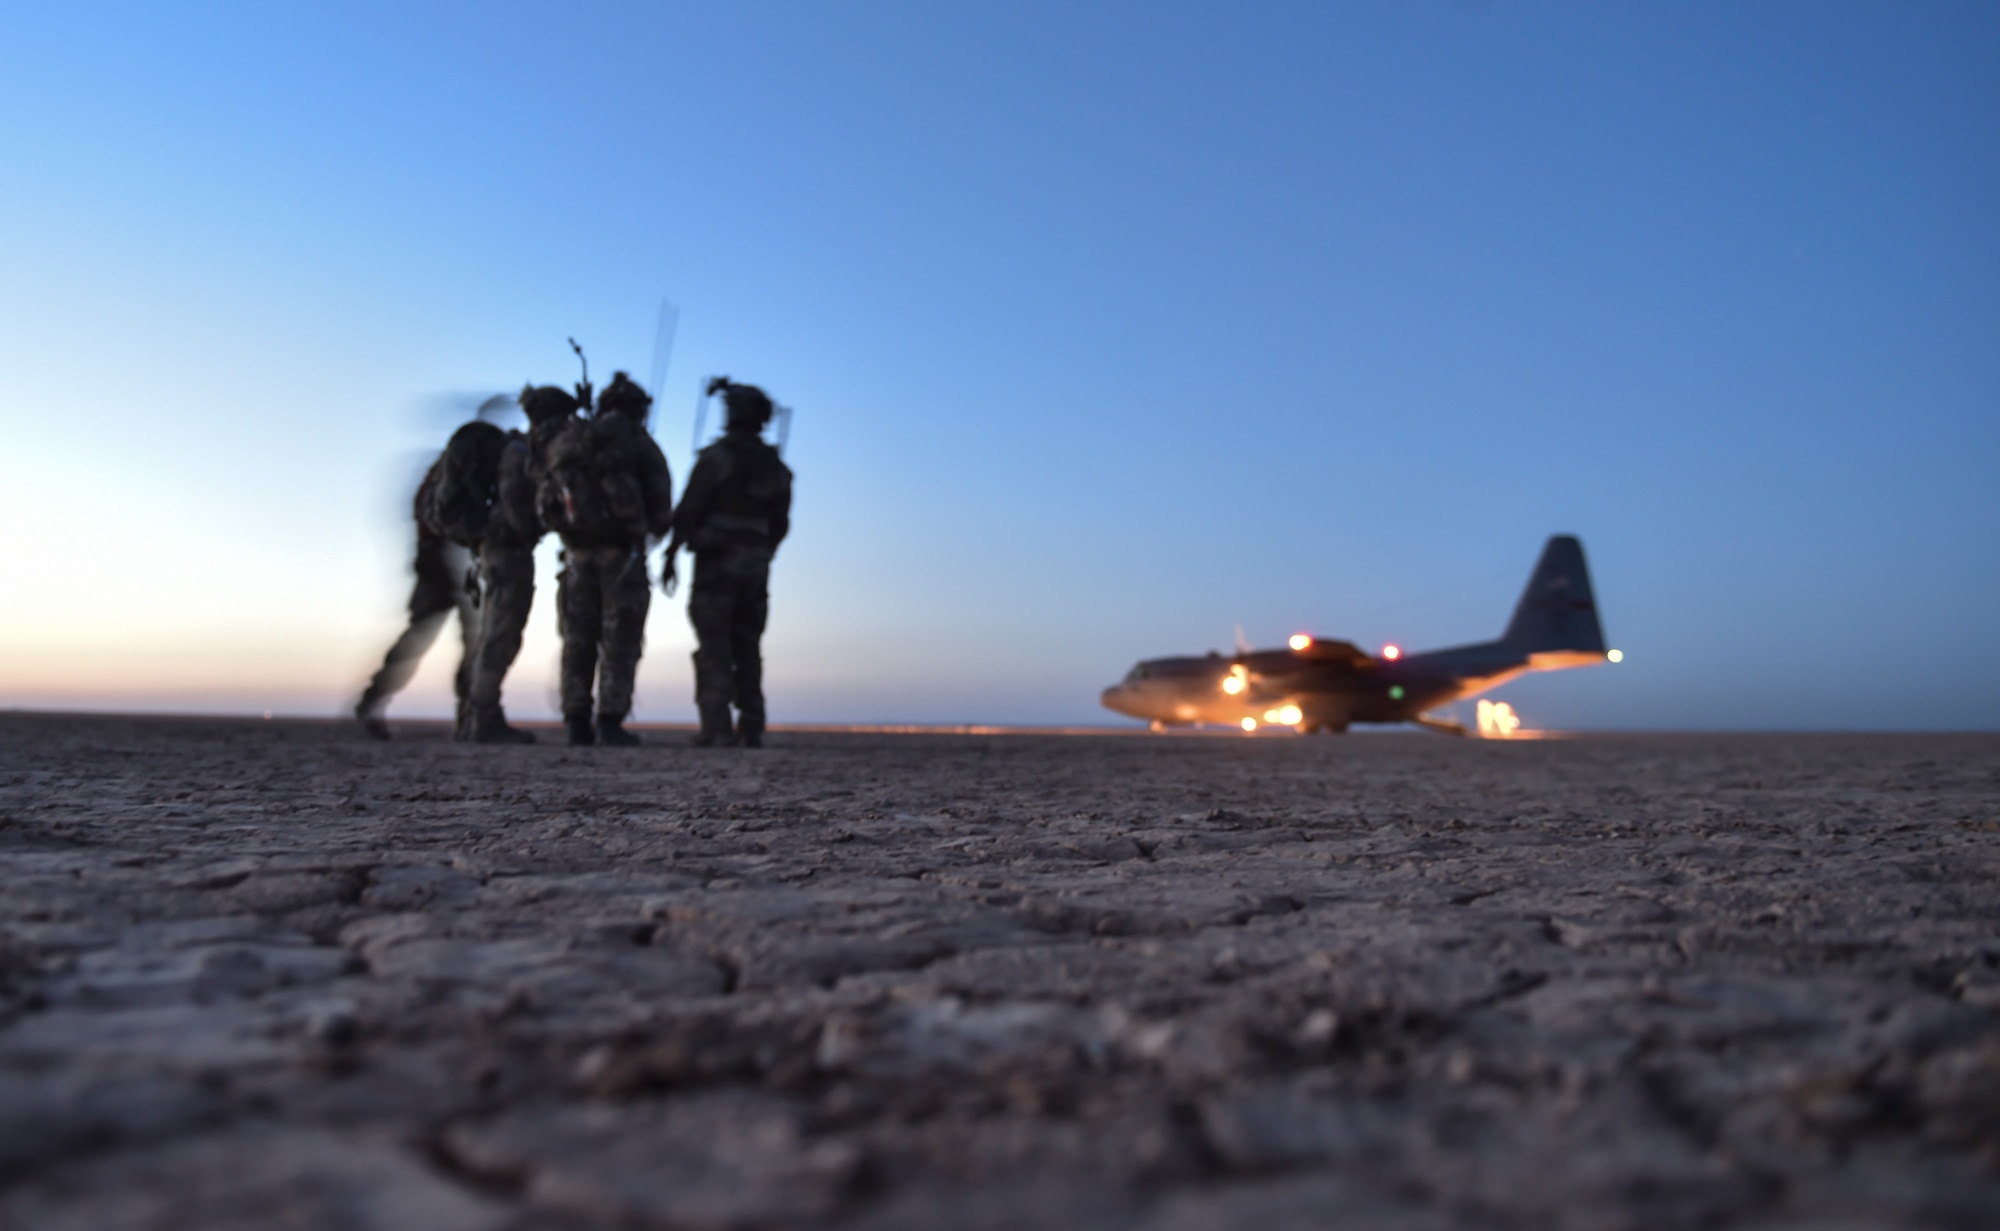 U.S. Air Force Special Tactics Airmen and Italy's 17th Stormo Incursori troops prepare to board an Ohio Air National Guard C-130H Hercules after it landed in a dry lake bed during Exercise Eager Lion, May 16, 2017, in Jordan. The joint special operations team assessed, opened, and controlled clandestine desert landing strip, which helped them train to provide strategic access for U.S. or allied partners. (U.S. Air Force photo by Senior Airman Ryan Conroy) 